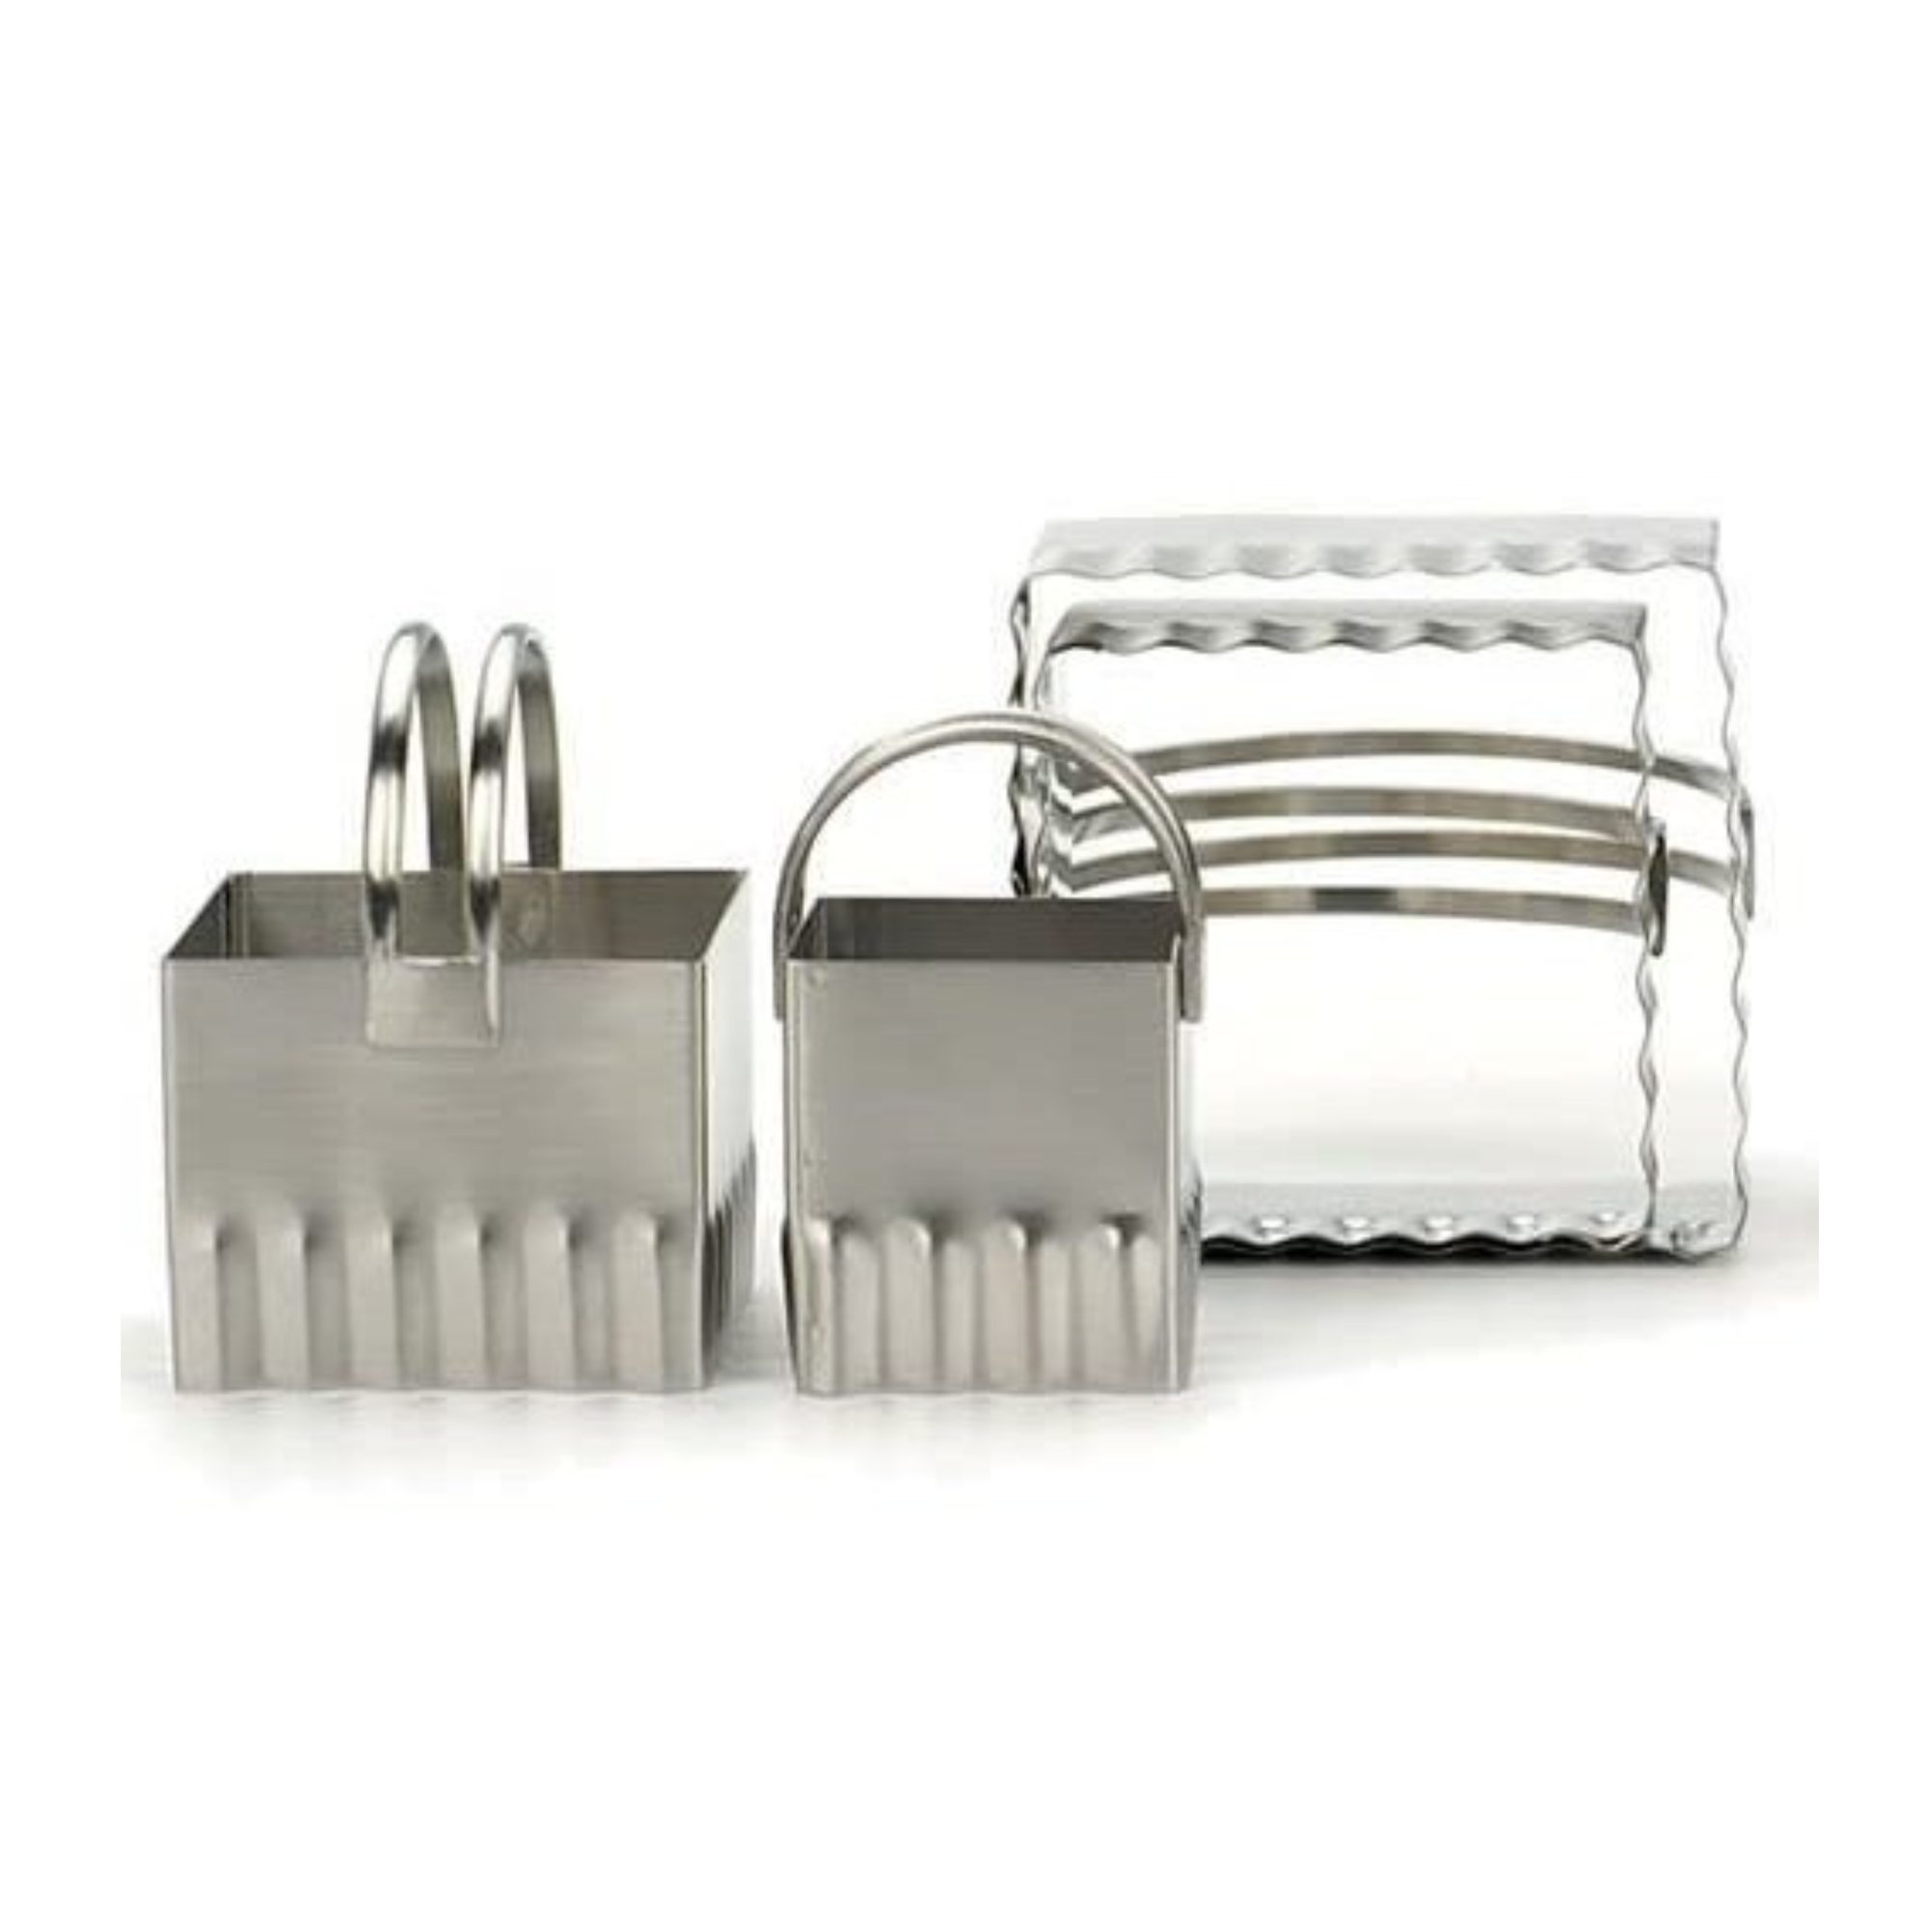 RSVP Biscuit Cutters - Rippled Square (Set of 4)